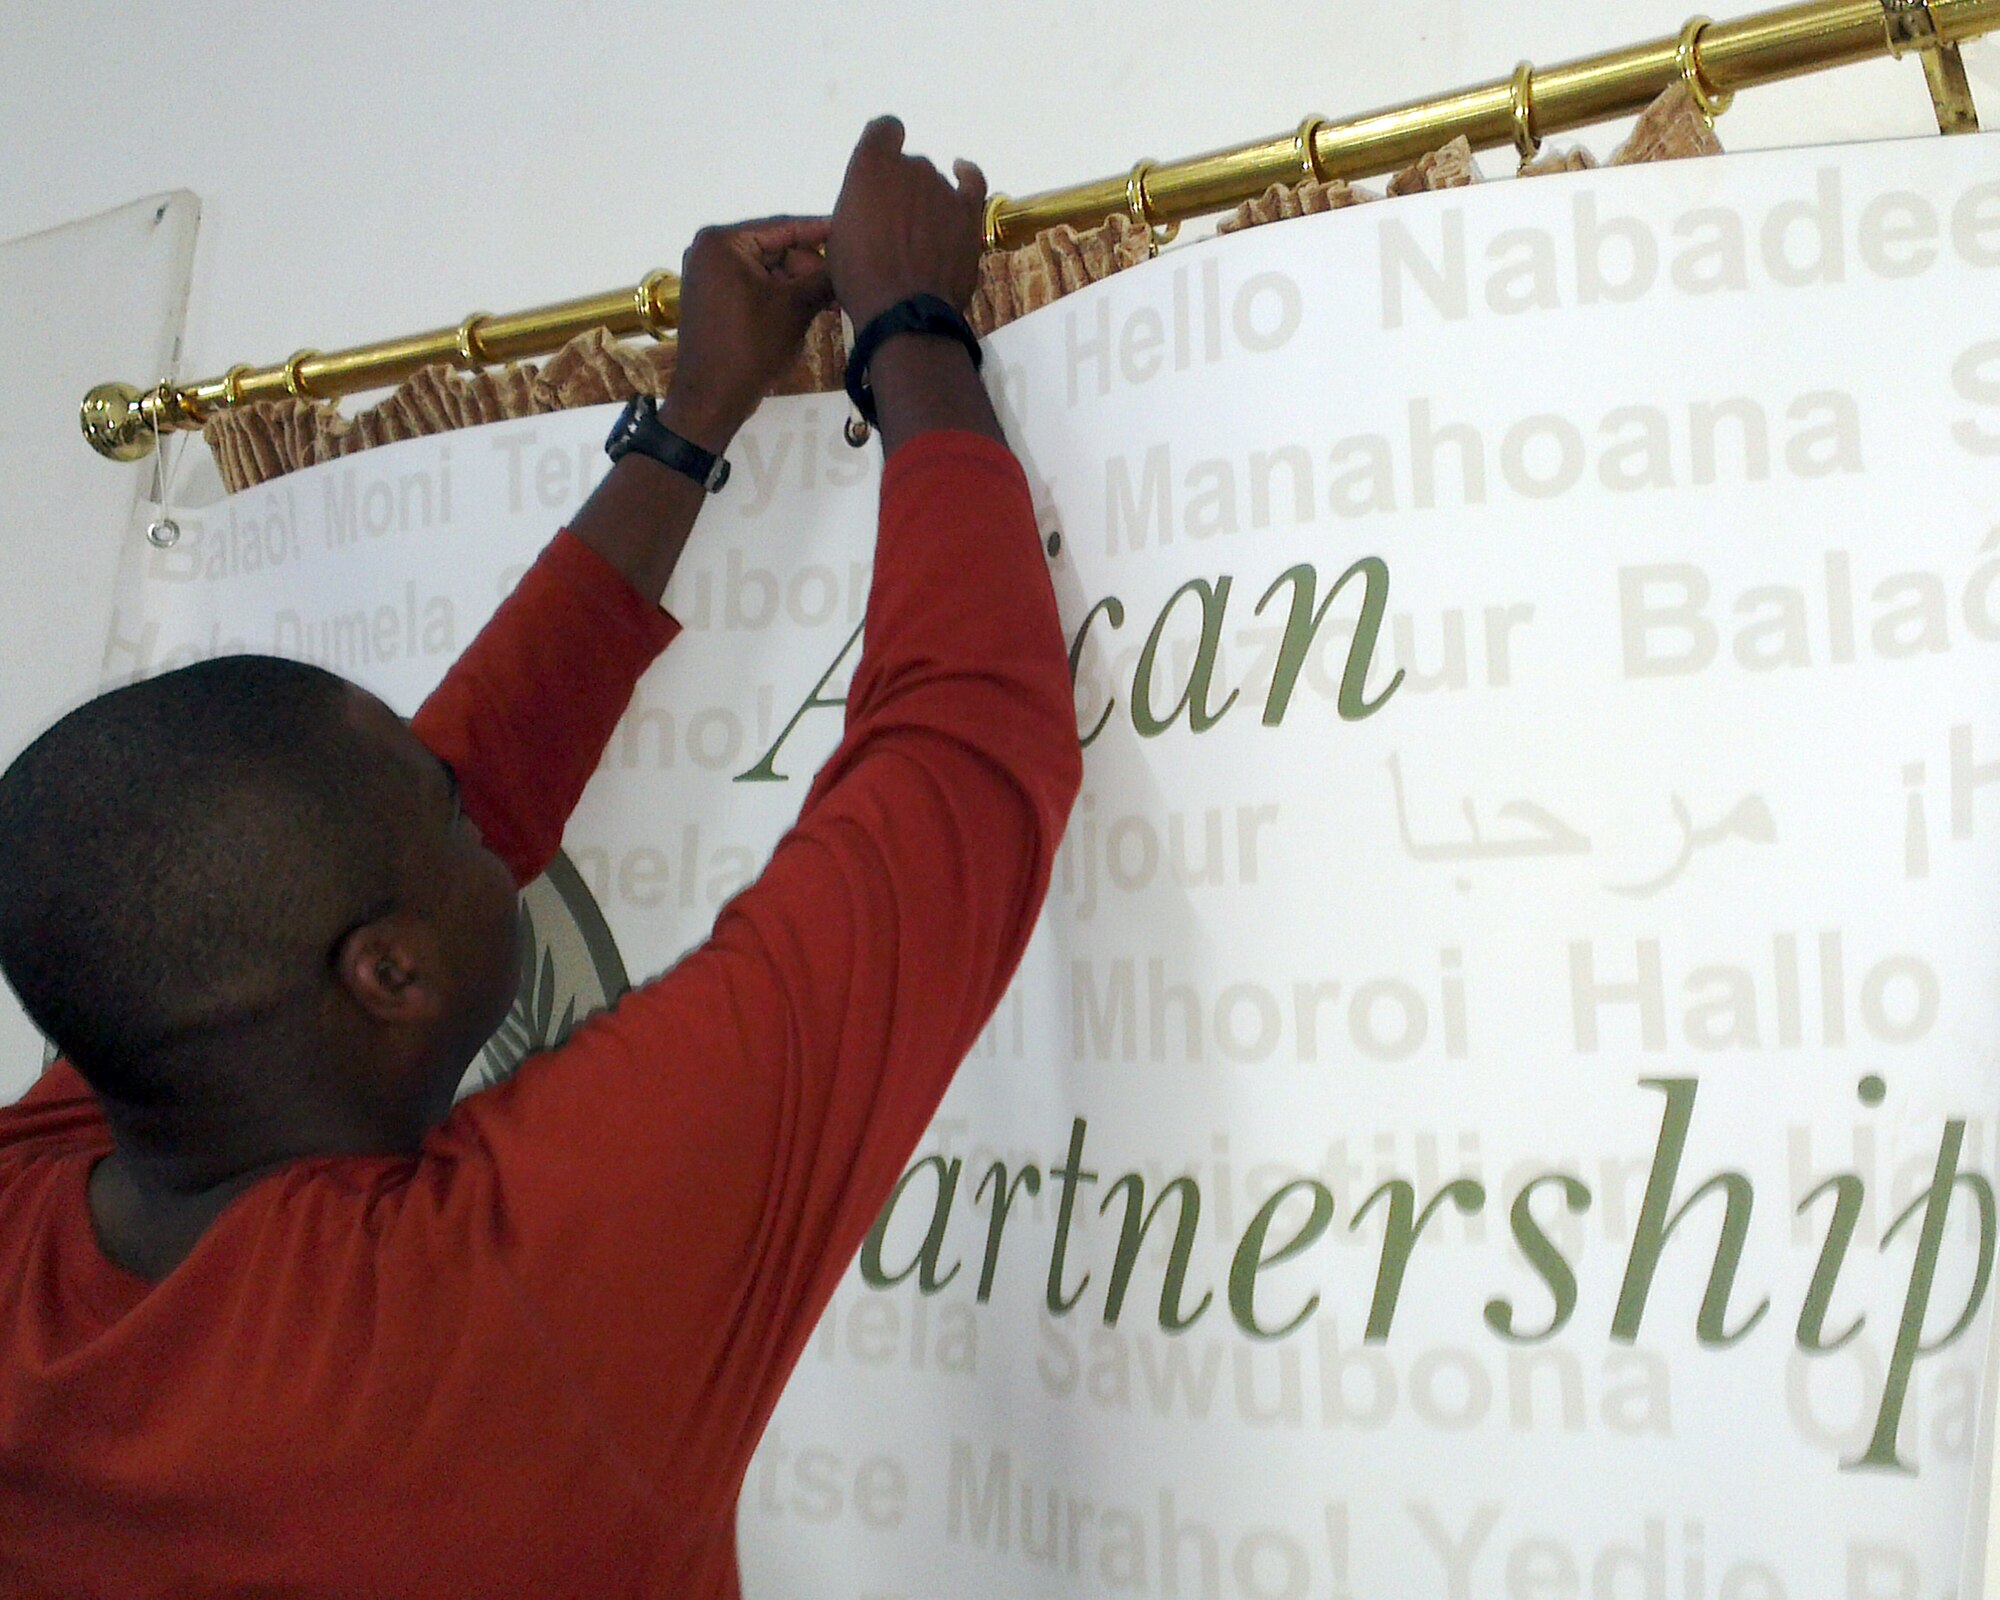 U.S. Air Force Master Sgt. Jerome Williams, ground safety instructor from the 818th Mobility Support Advisory Squadron, Joint Base McGuire-Dix-Lakehurst, N.J., hangs up an African Partnership Flight Mauritania banner Aug. 30, 2014, in his classroom prior to students arriving the next day. Airmen from six African nations will arrive to Atar Air Base in Mauritania to take part in the third APF for this year. This APF is scheduled to teach students ground and flight safety, as well as, Intelligence Surveillance Reconnaissance, and command operations with a primary goal to help partner nations fight terrorism in the region. (U.S. Air Force photo/Master Sgt. Brian Boisvert/Released)